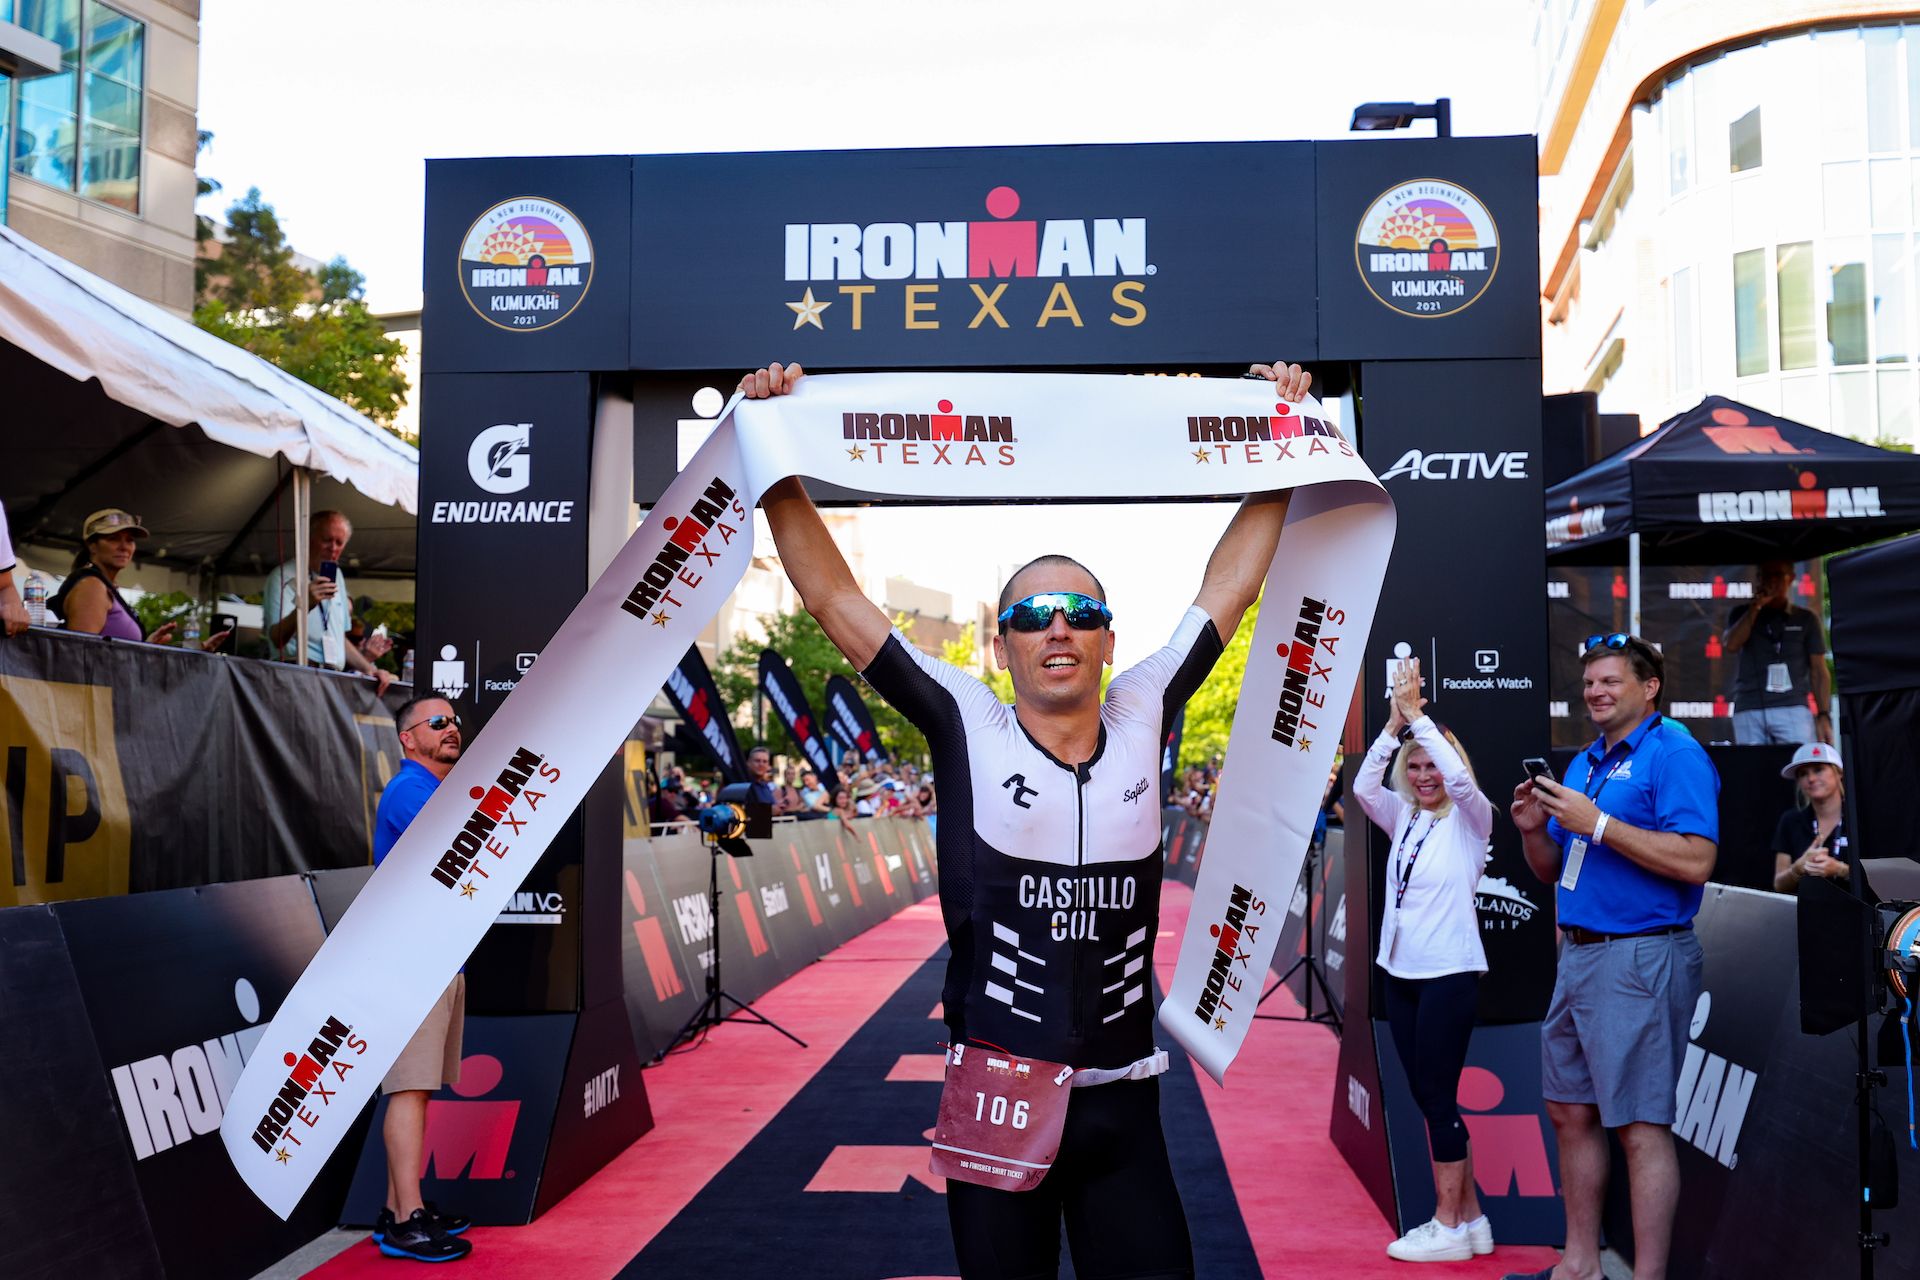 Ironman Texas Returns To The Woodlands For The First Time In Over Two